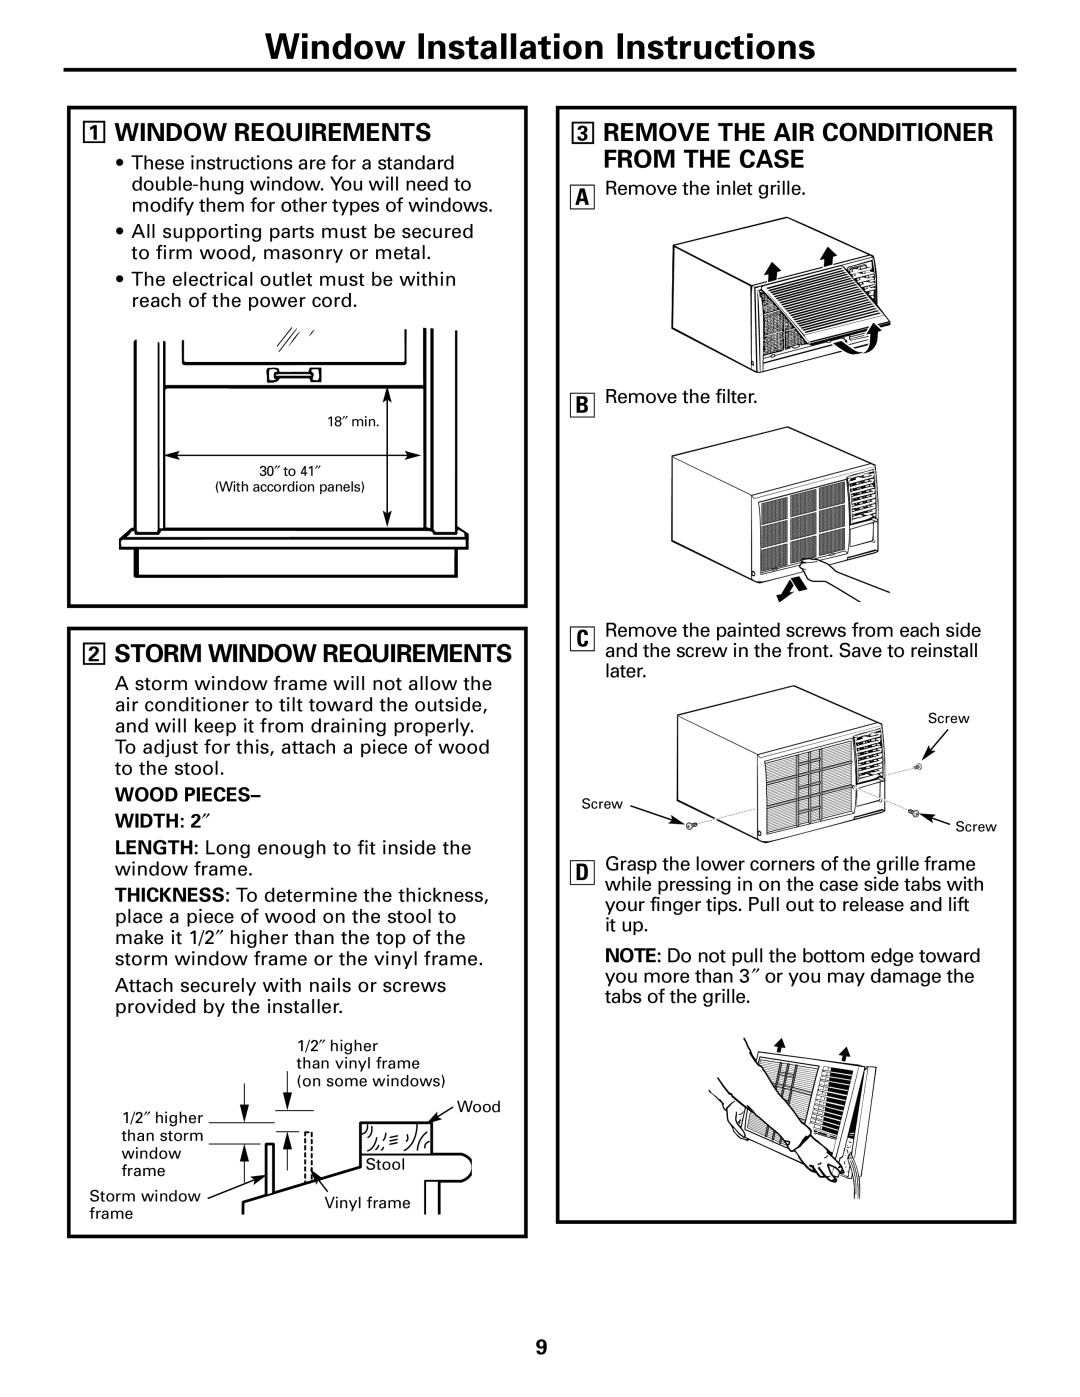 GE AEE18 owner manual 1WINDOW REQUIREMENTS, 2STORM WINDOW REQUIREMENTS, 3REMOVE THE AIR CONDITIONER FROM THE CASE 